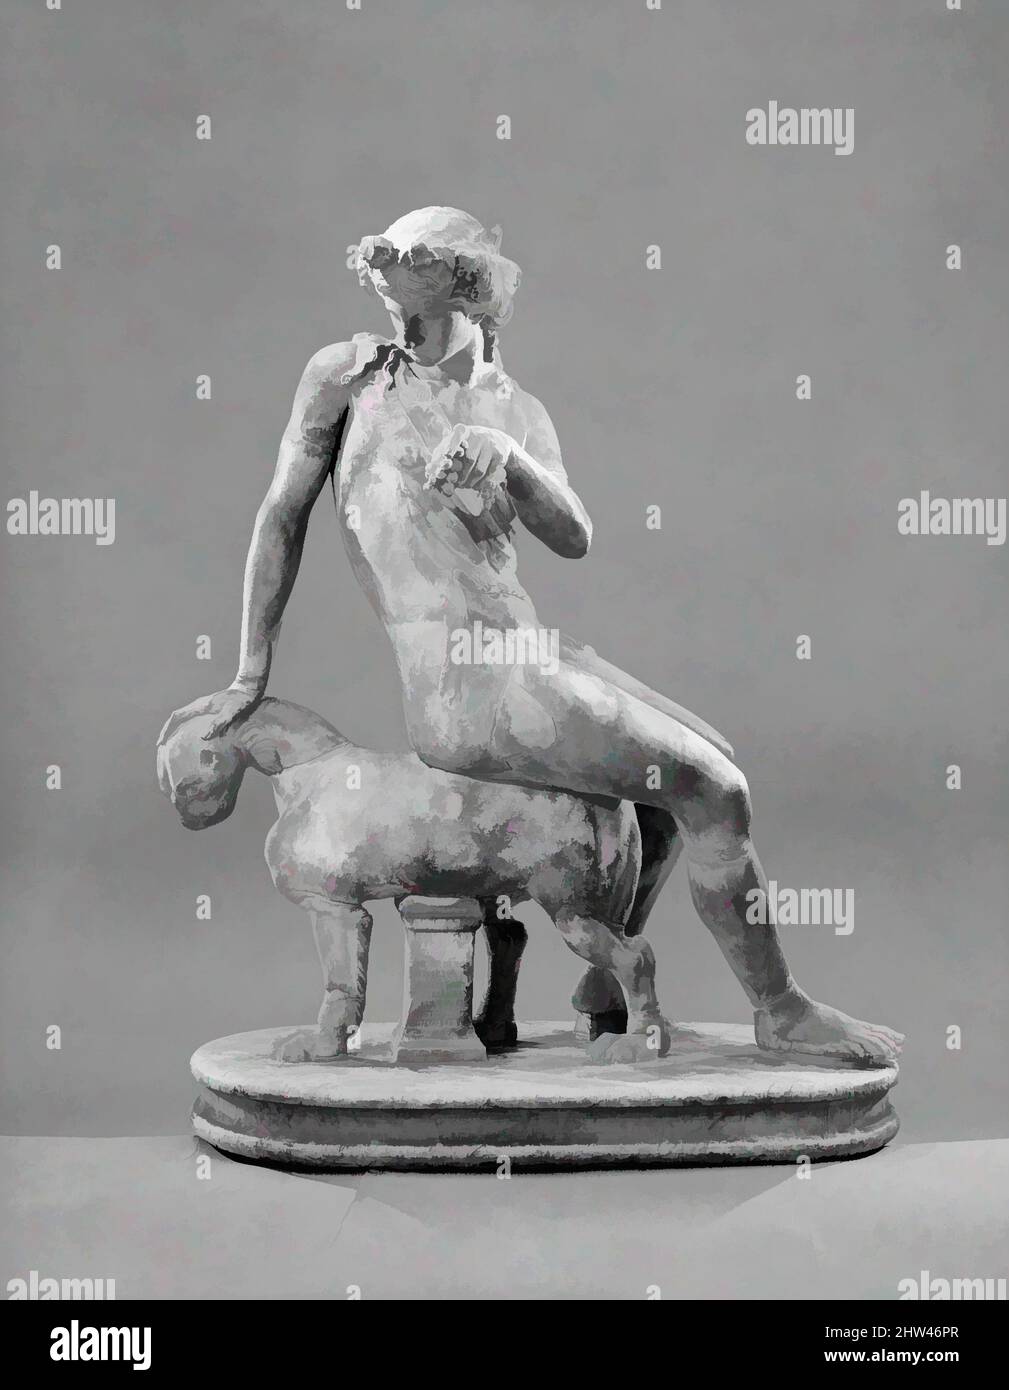 Art inspired by Marble statue of Dionysos seated on a panther, Imperial, 1st–2nd A.D., Roman, Marble, Overall: 56 3/8 in. (143.2 cm), Stone Sculpture, The Latin inscription translates as: Philetus, a freeman of the Augusti, willingly fulfilled his dedication to the Invincible God, Classic works modernized by Artotop with a splash of modernity. Shapes, color and value, eye-catching visual impact on art. Emotions through freedom of artworks in a contemporary way. A timeless message pursuing a wildly creative new direction. Artists turning to the digital medium and creating the Artotop NFT Stock Photo